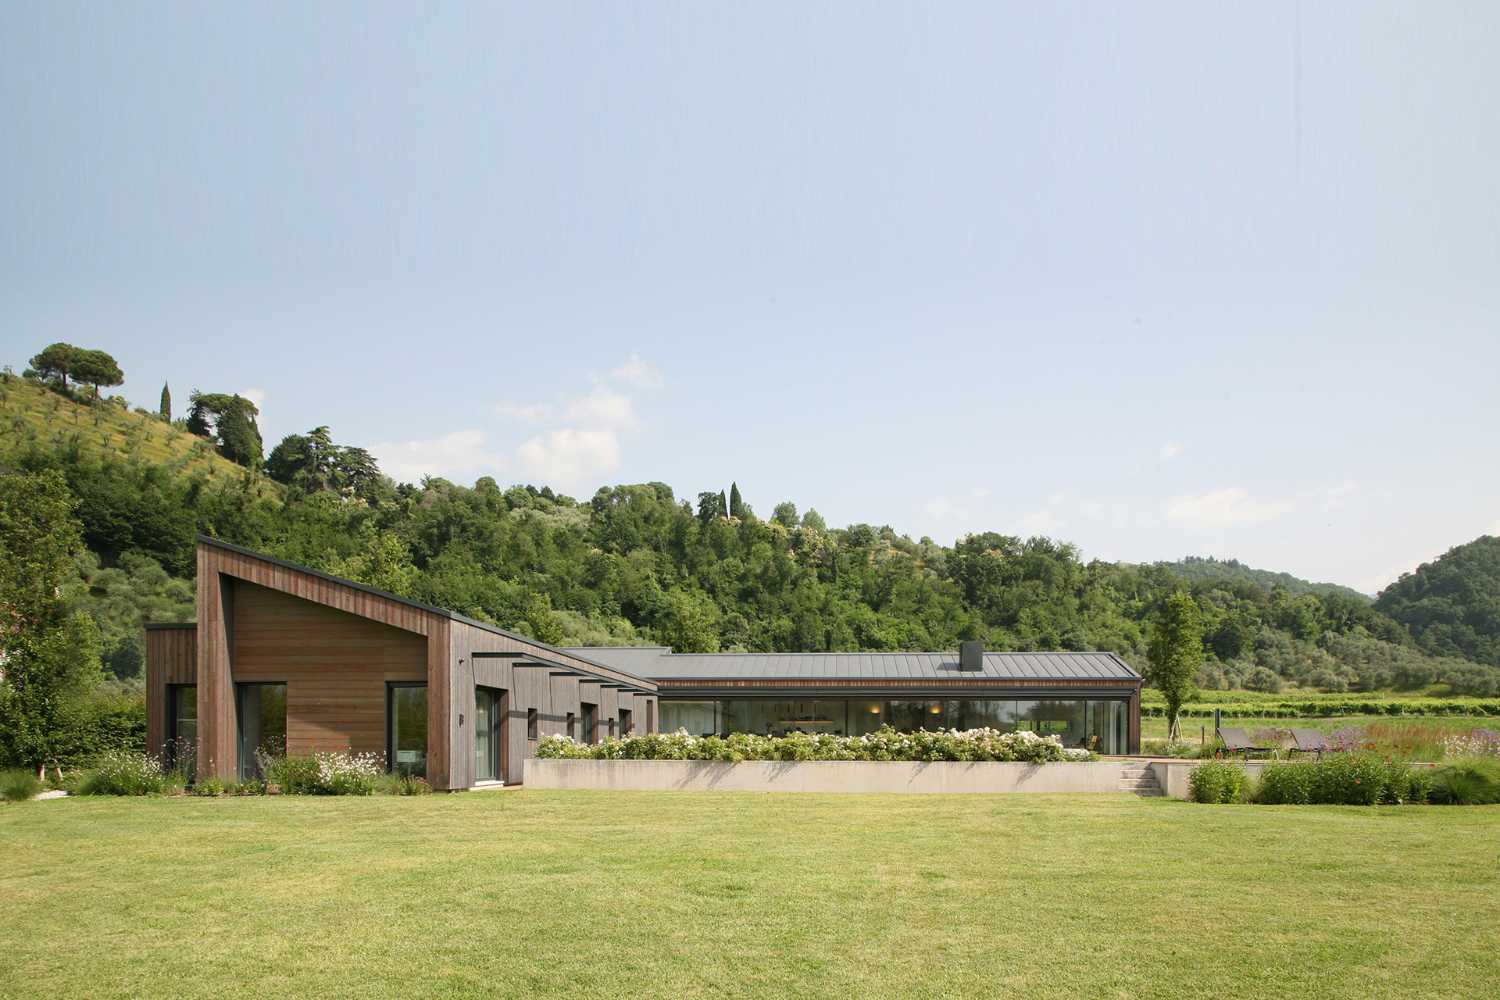 The farming landscape of Bassano del Grappa embraces the new country house